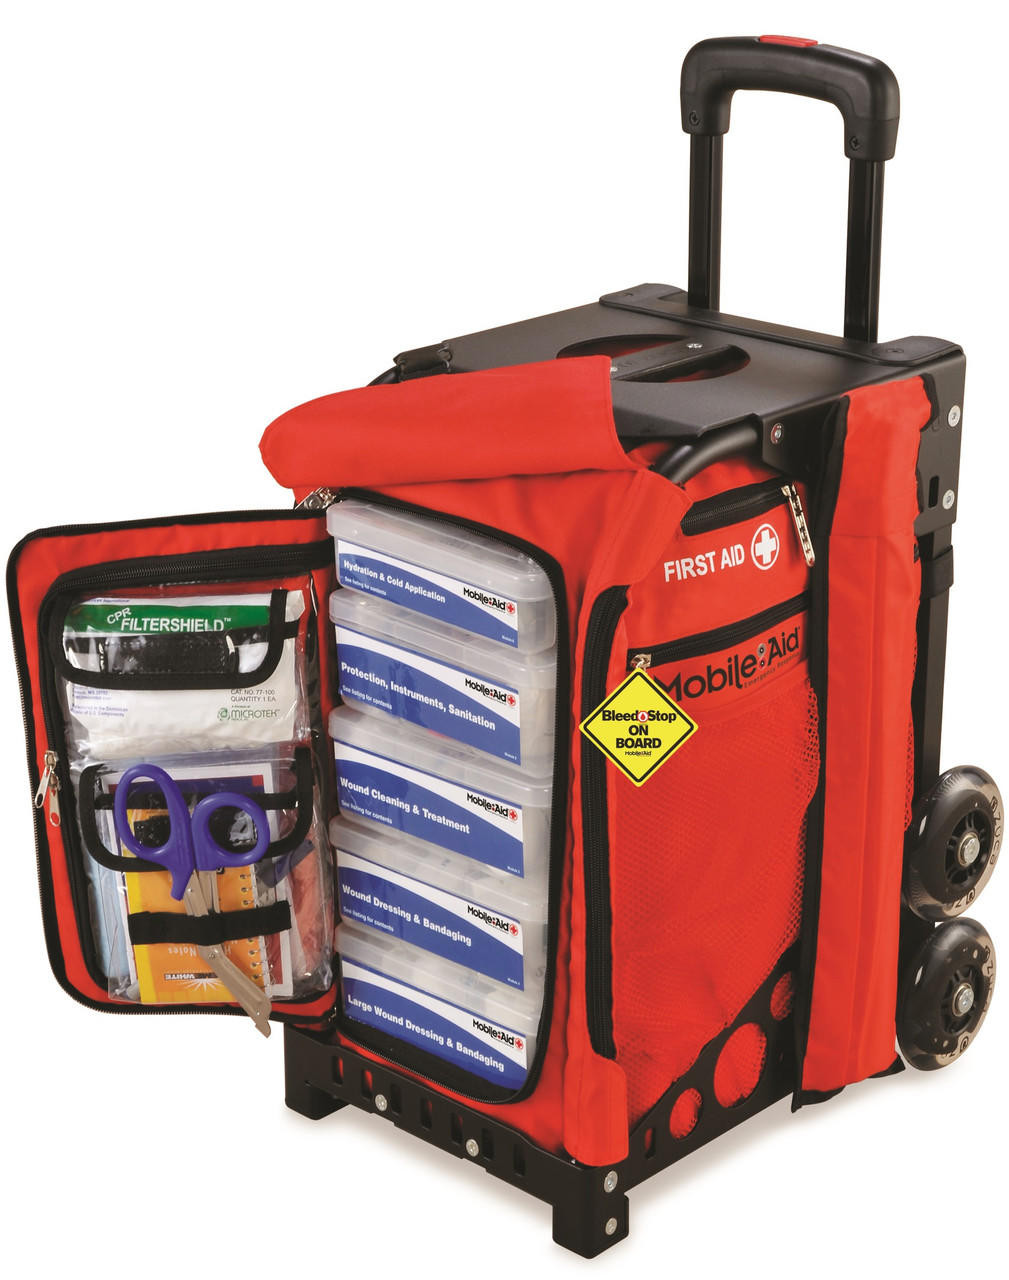 https://www.shifflerequip.com/lifesecure-easy-roll-modular-trauma-first-aid-station-with-bleedstop-compact-200-bleeding-control-kit/